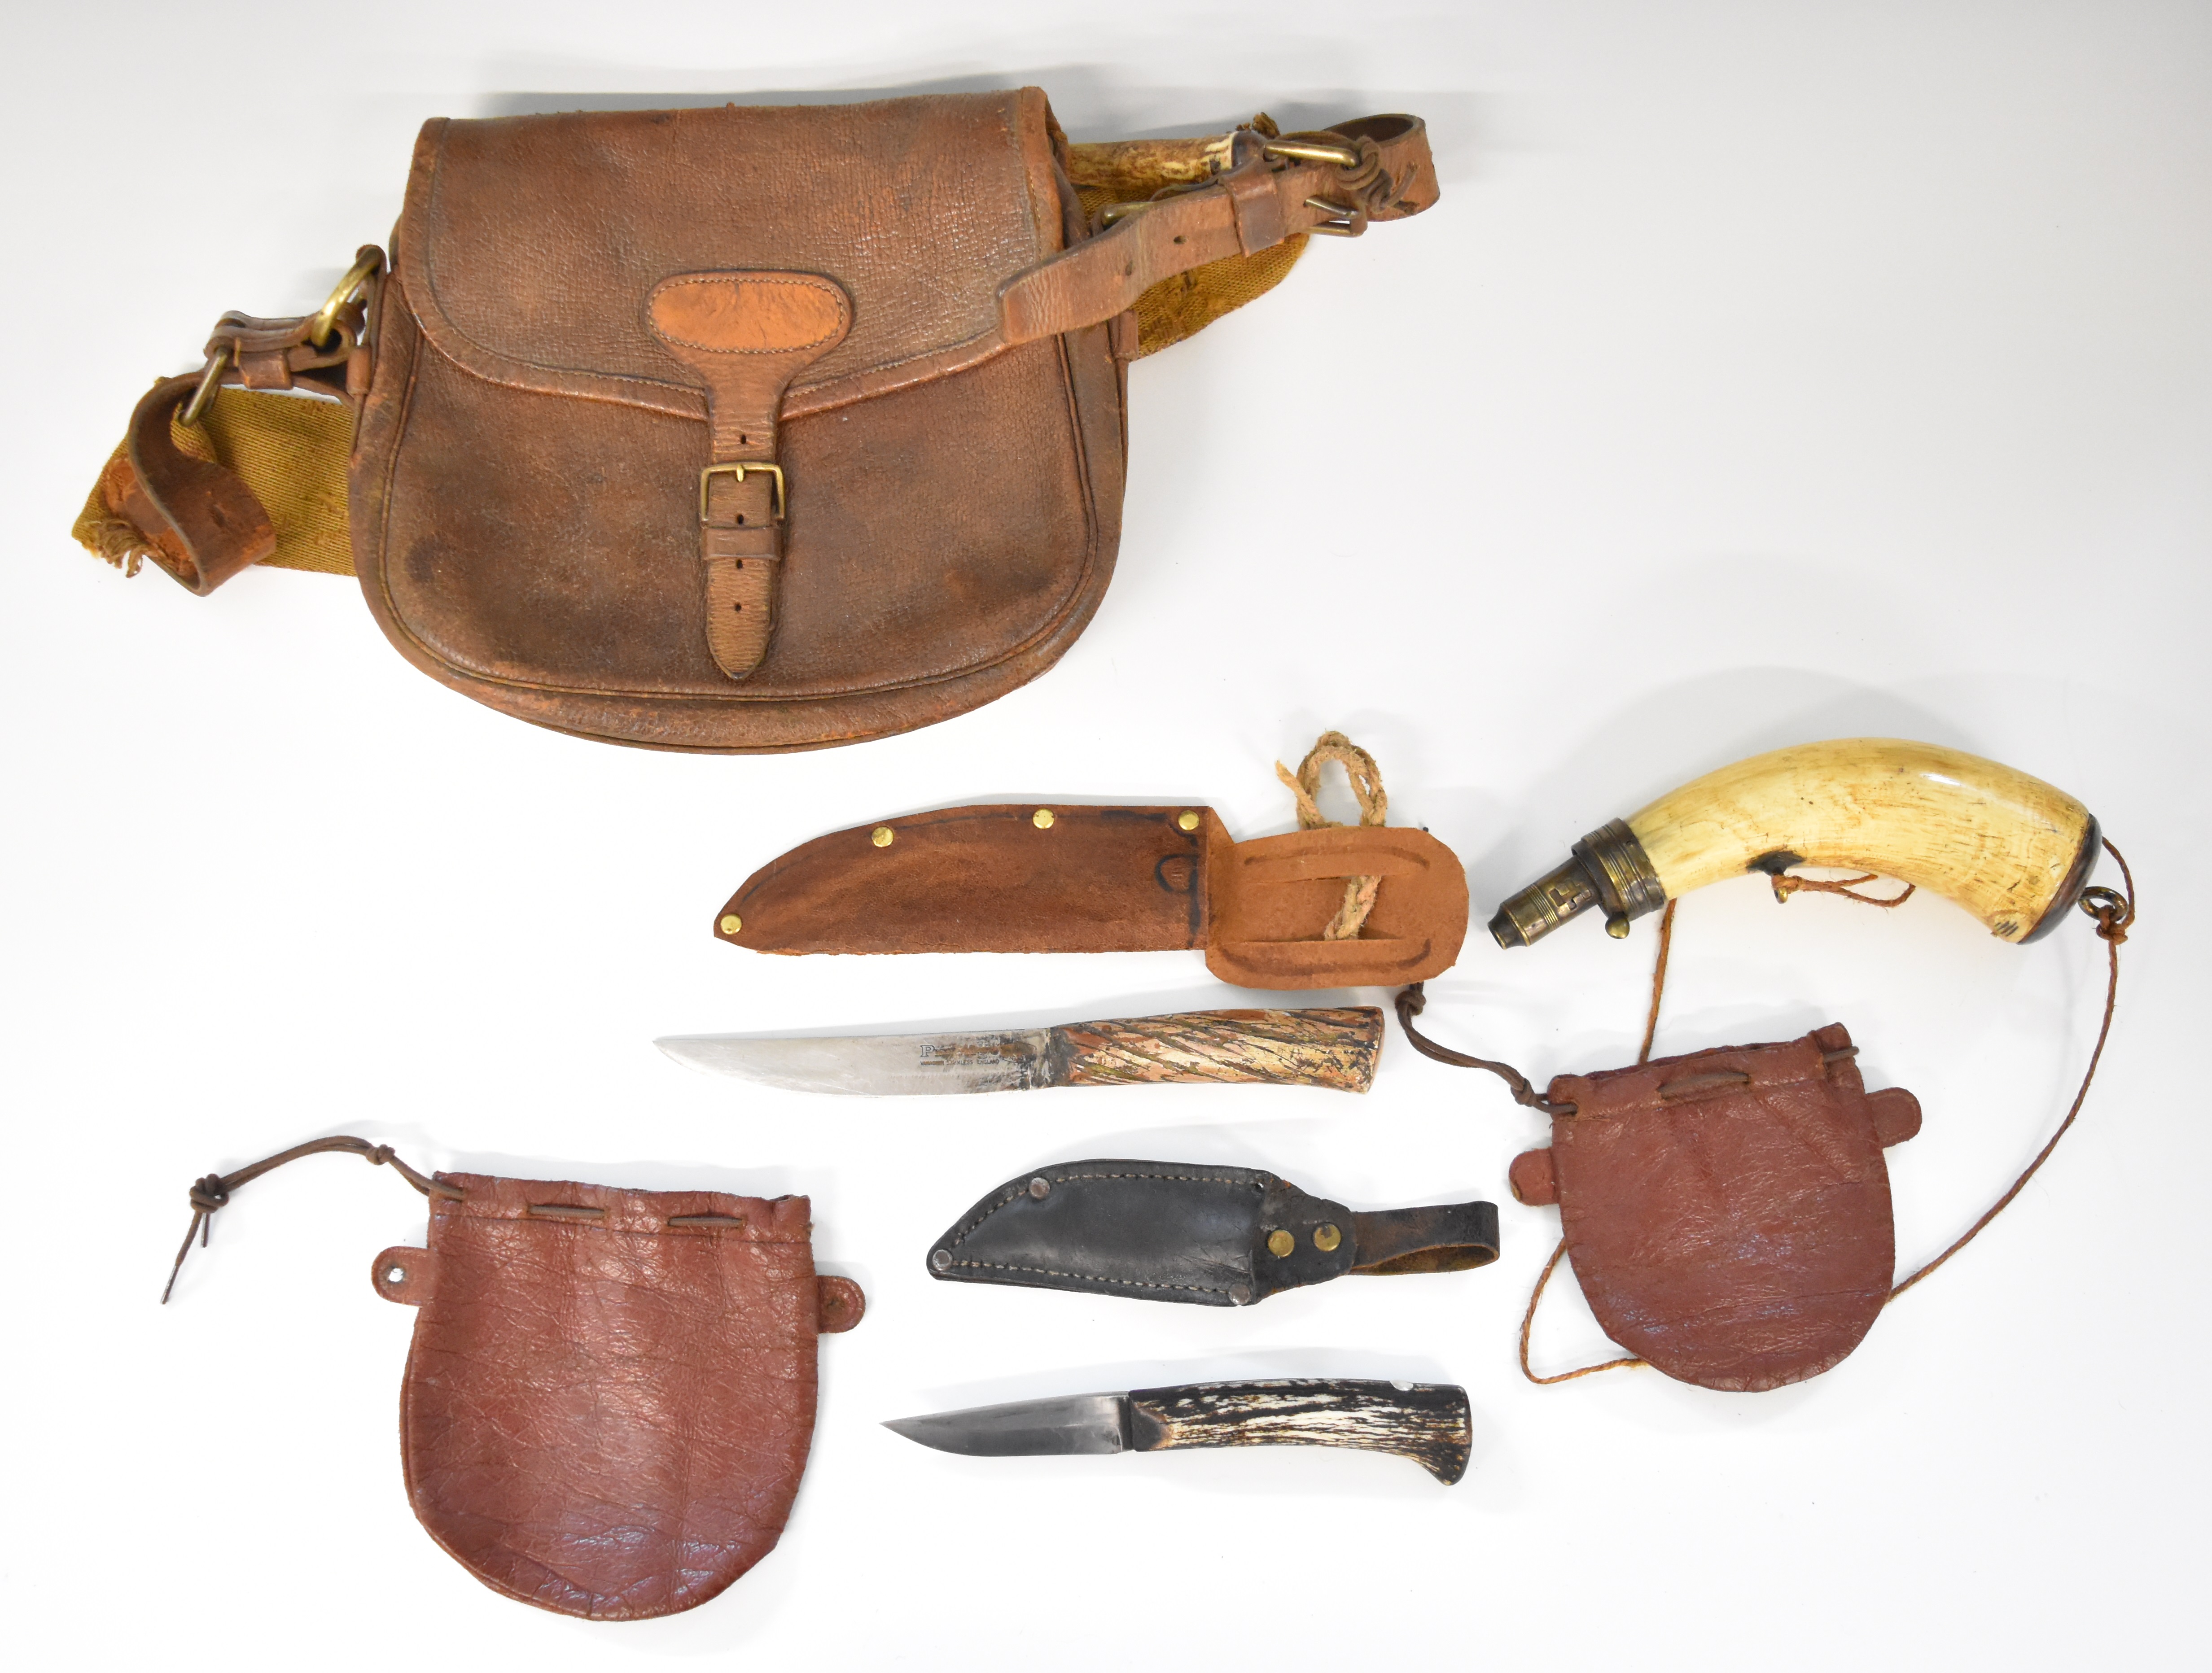 Leather Possibles bag with various hand made accessories including flint or bullet pouches, powder